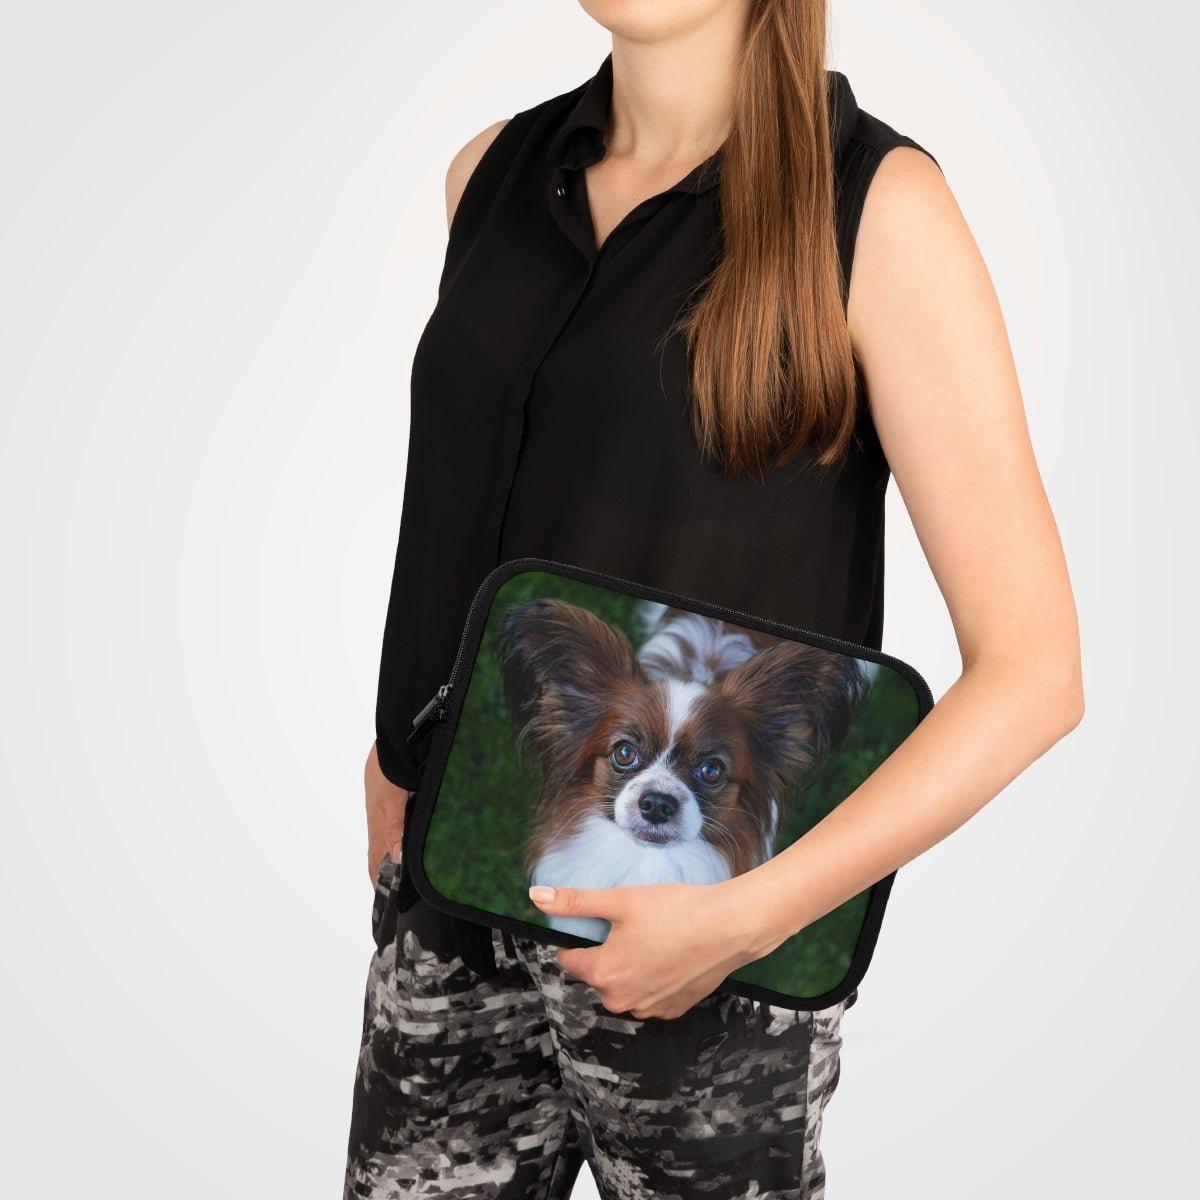 Sable Papillon Laptop Sleeve - Puffin Lime